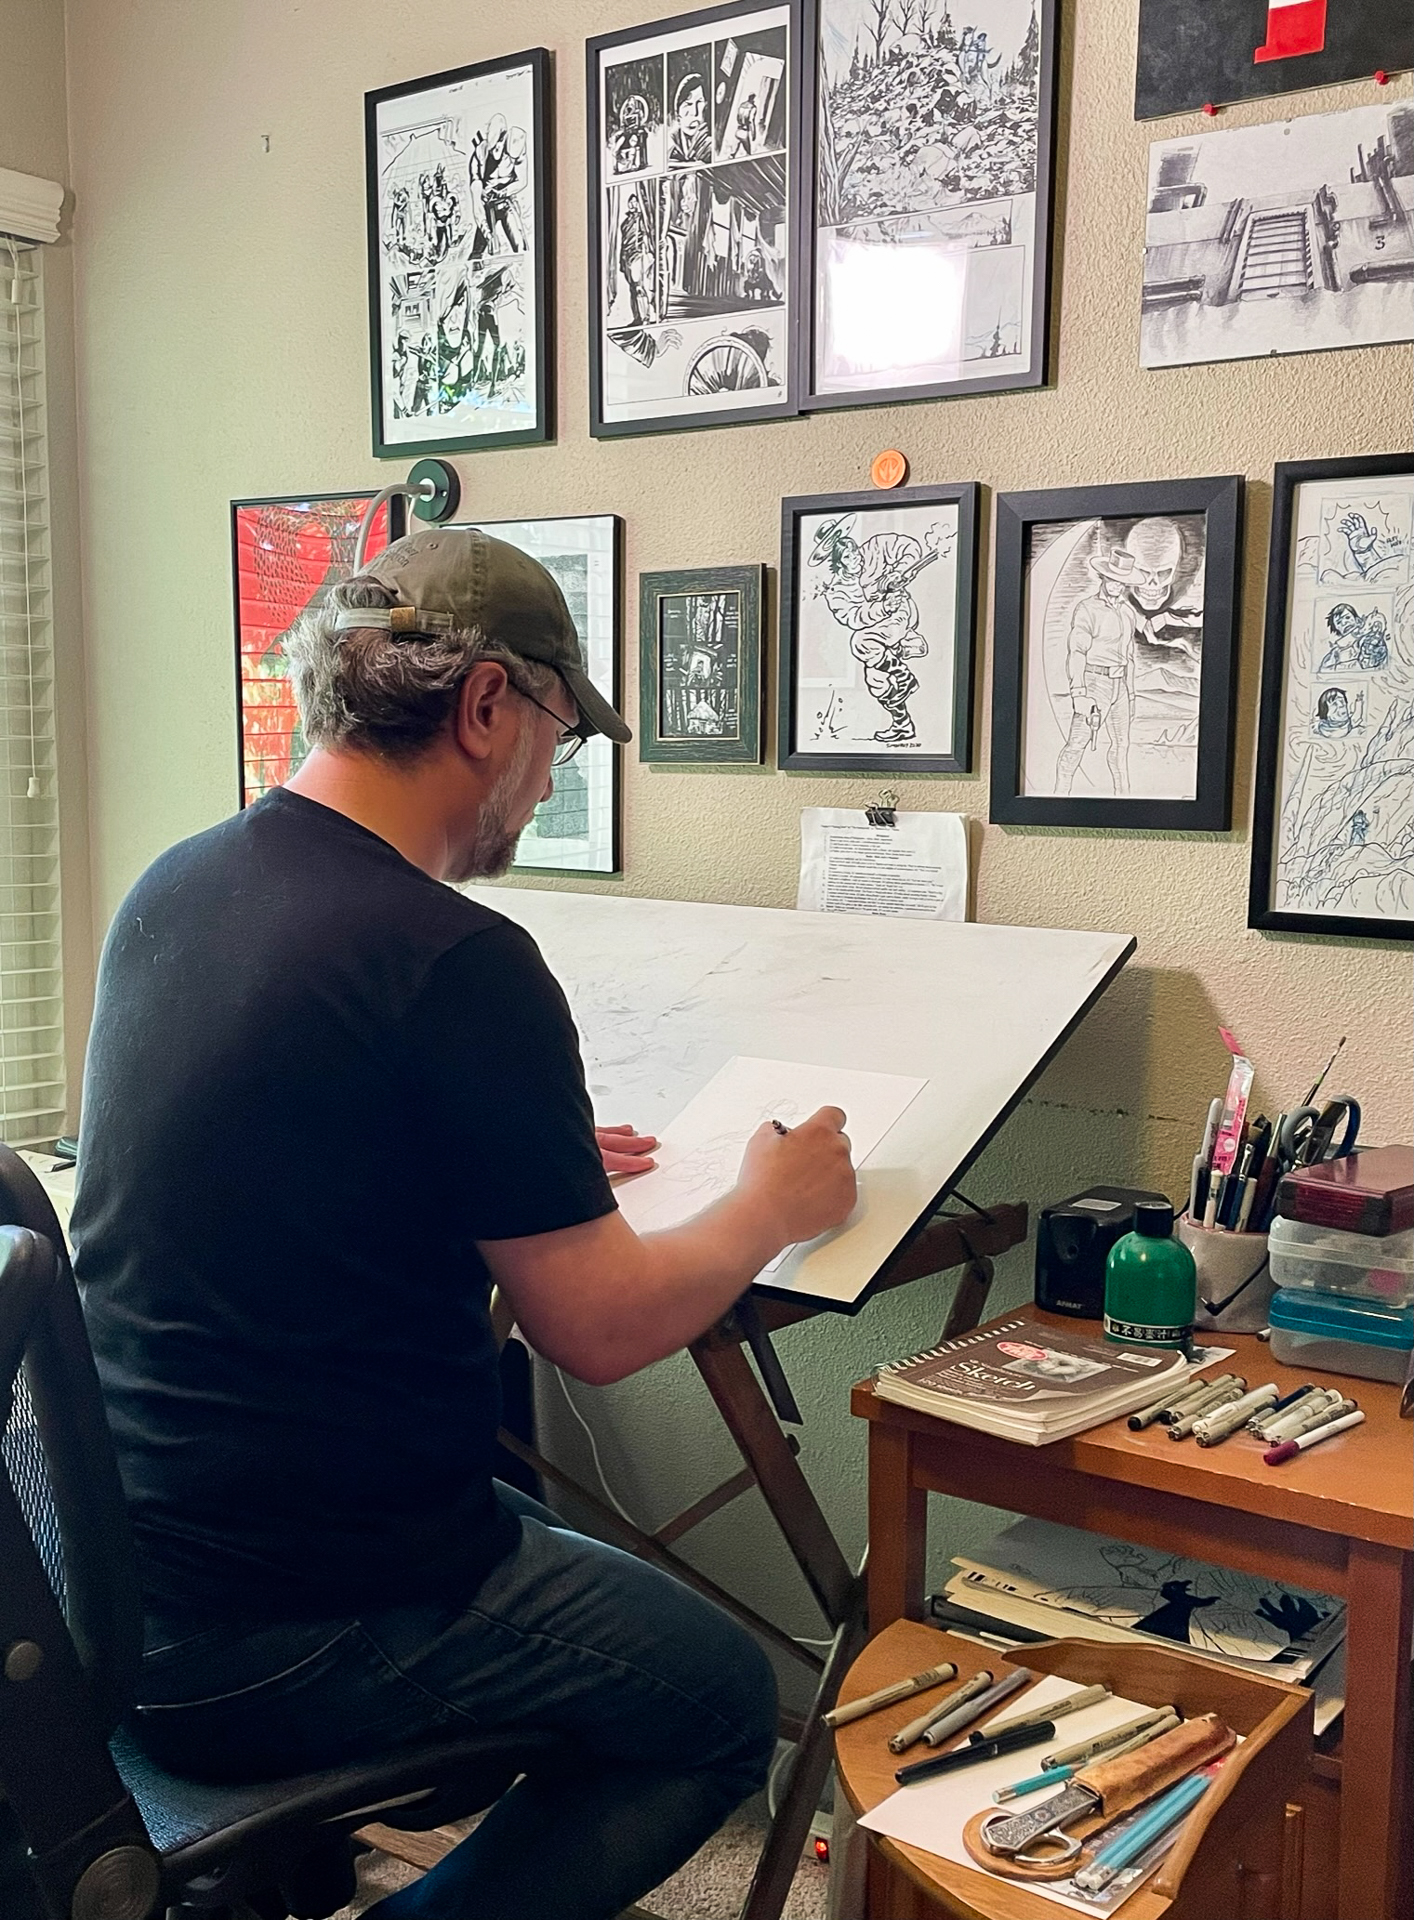 Dan Bethel, a writing lecturer at Sacramento State, sits at his art table in his home and works on drawings for his comic book Long John.